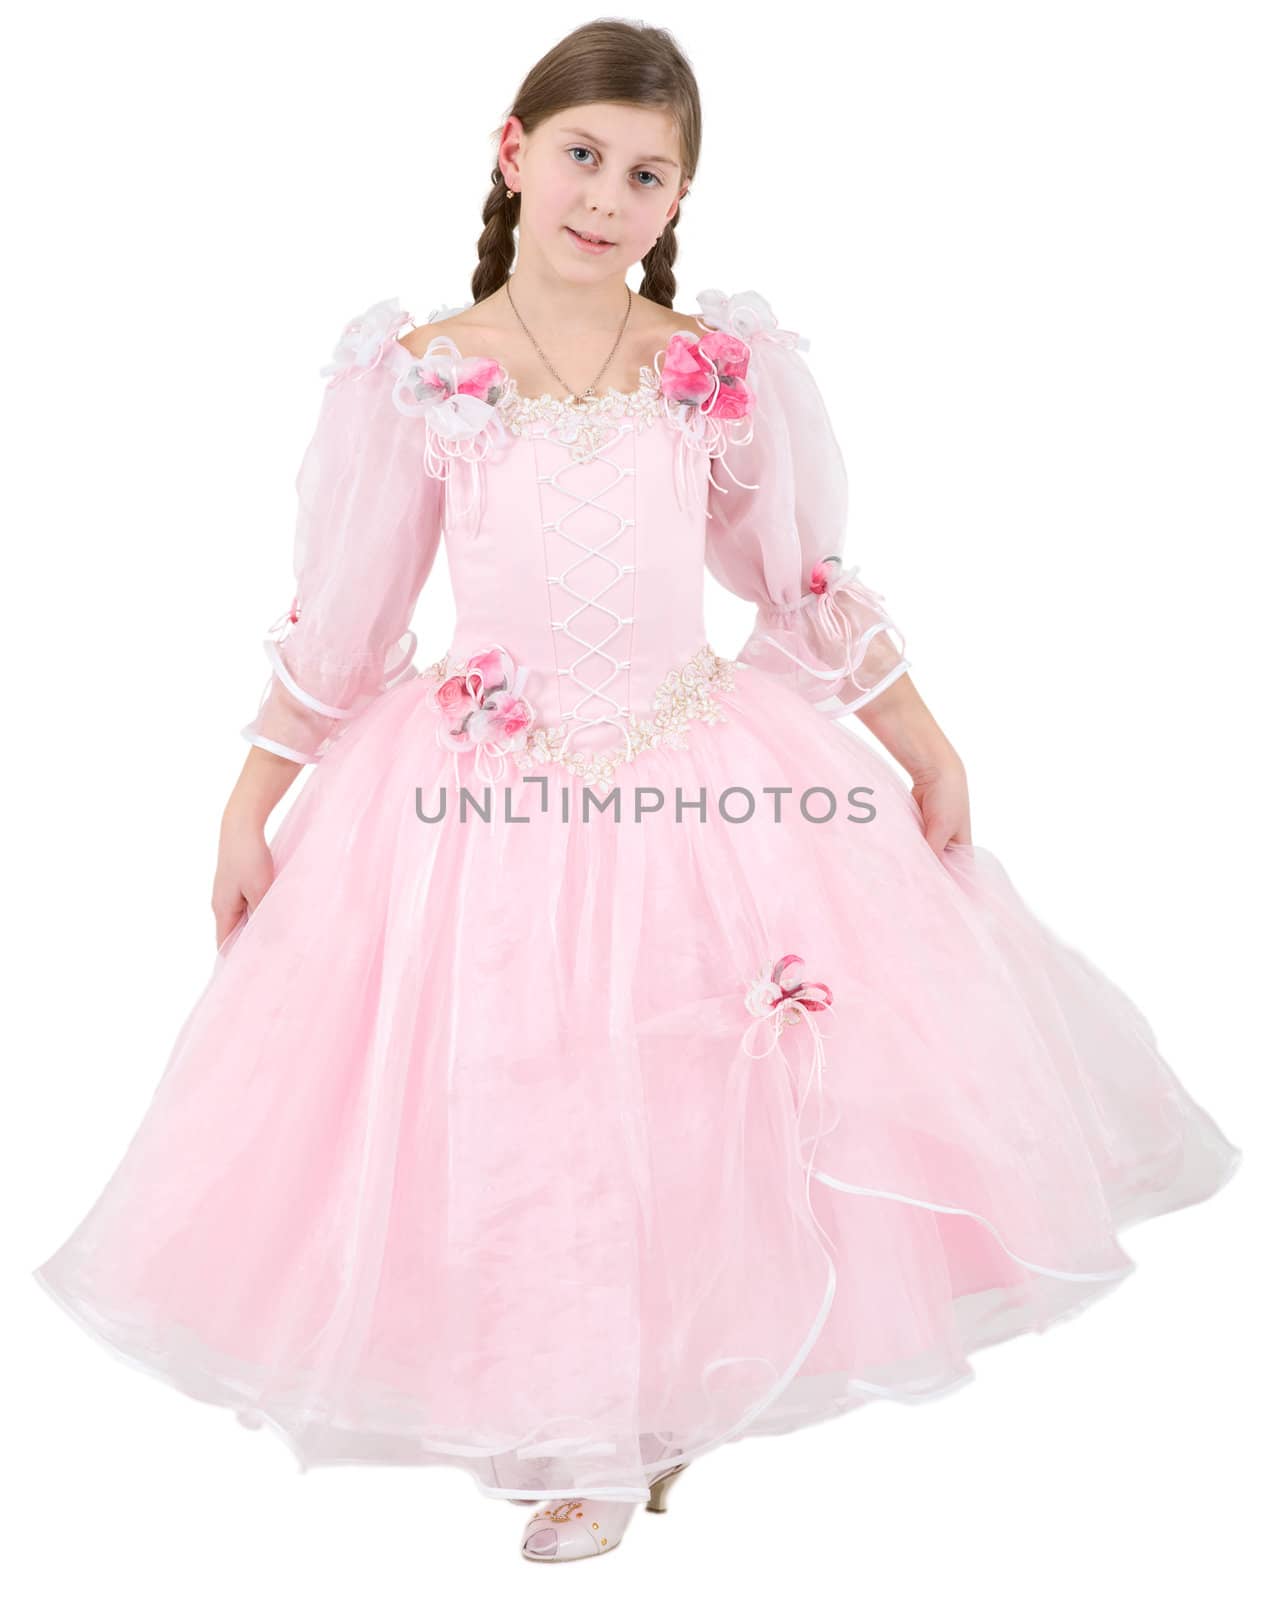 Girlie in pink clothes on a white background